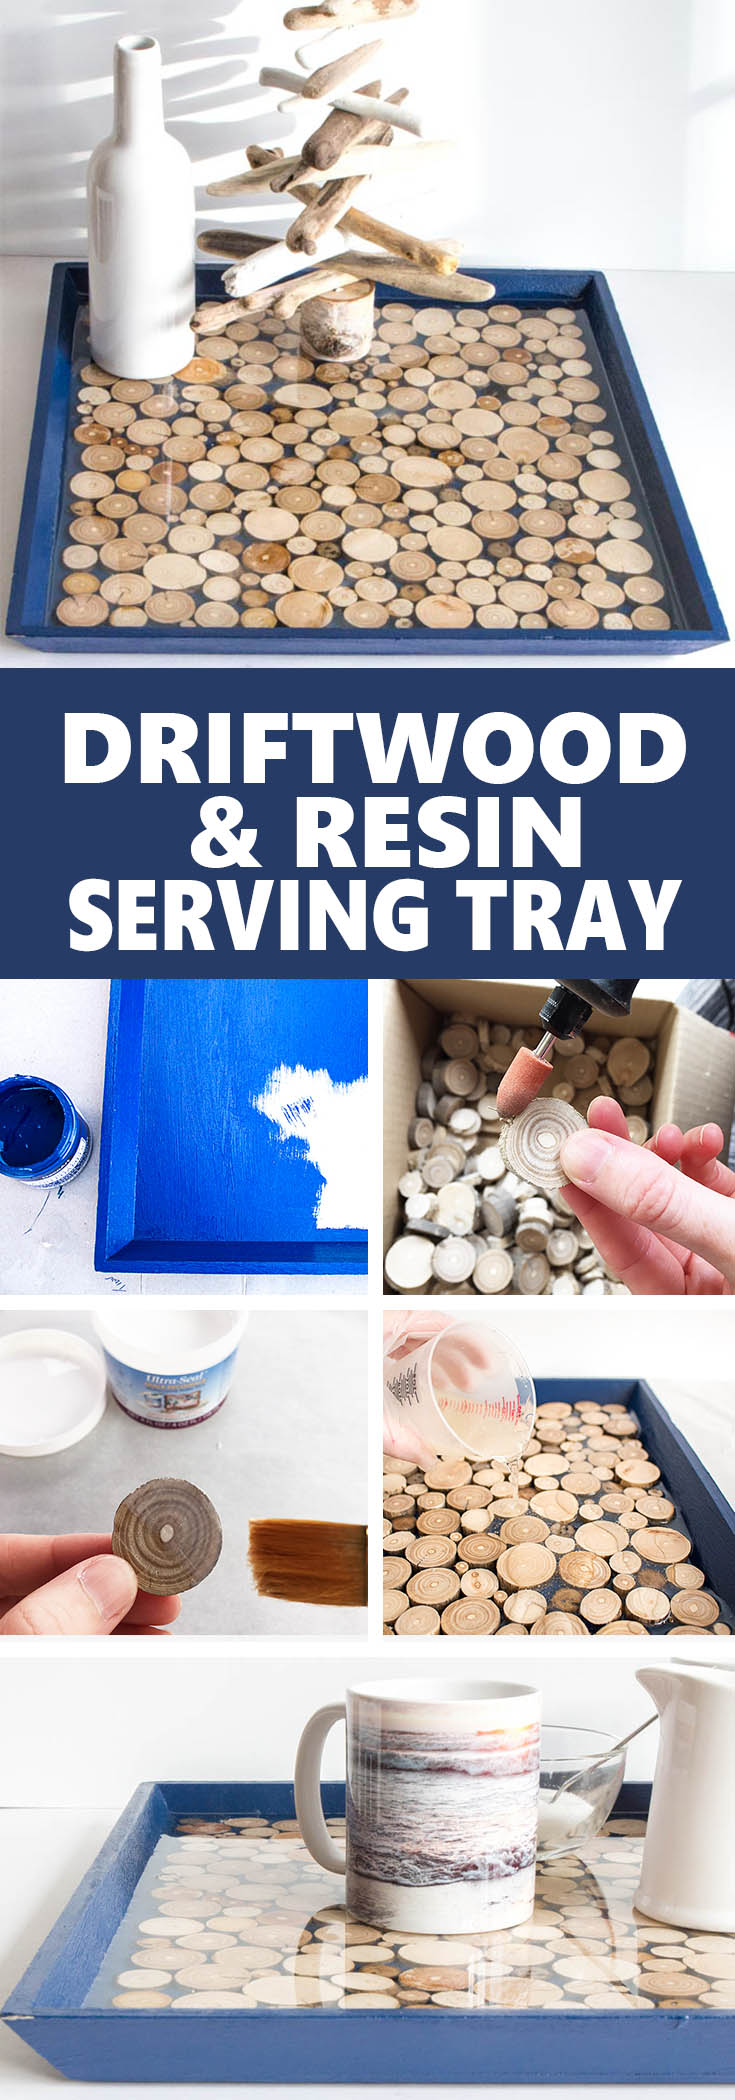 DIY serving tray with driftwood slices and EnviroTex Lite Pour-On Resin. Gorgeous handmade home decor or gift idea. #CoastalStyle #ResinCrafts #ResinDecor #ResinCraftsBlog via @resincraftsblog